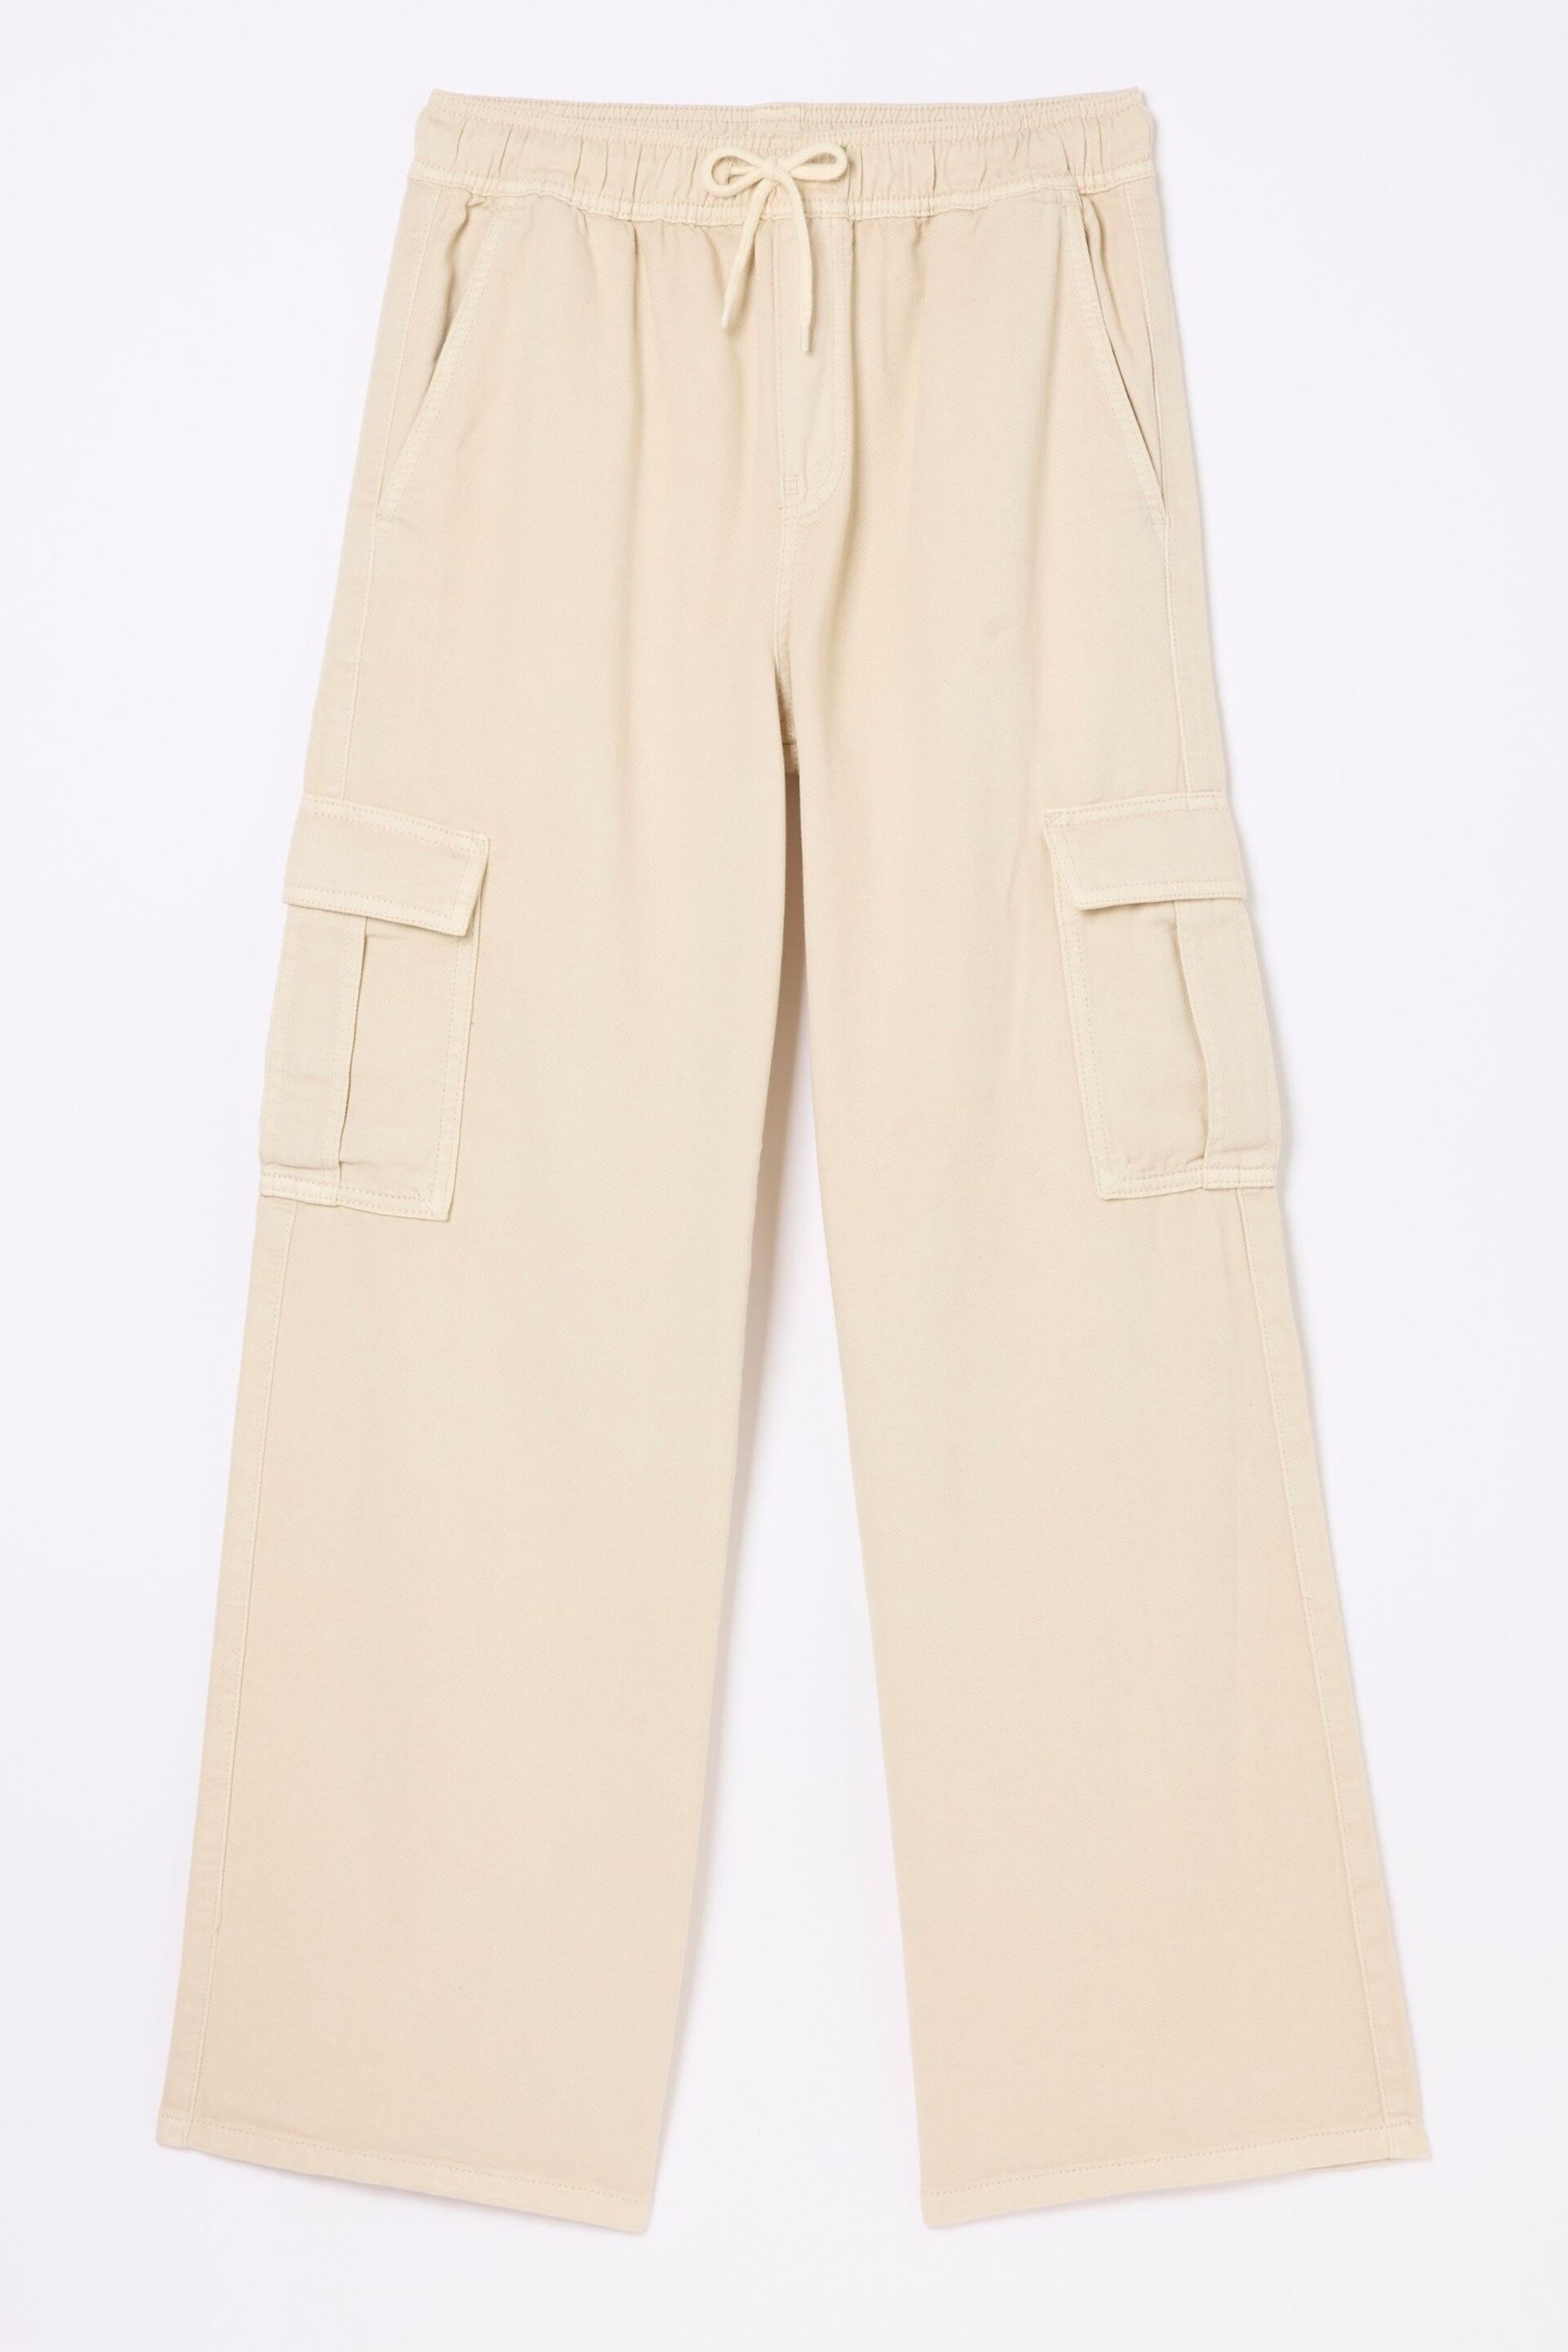 FatFace Natural Cargo Wide Leg Jeans - Image 5 of 5